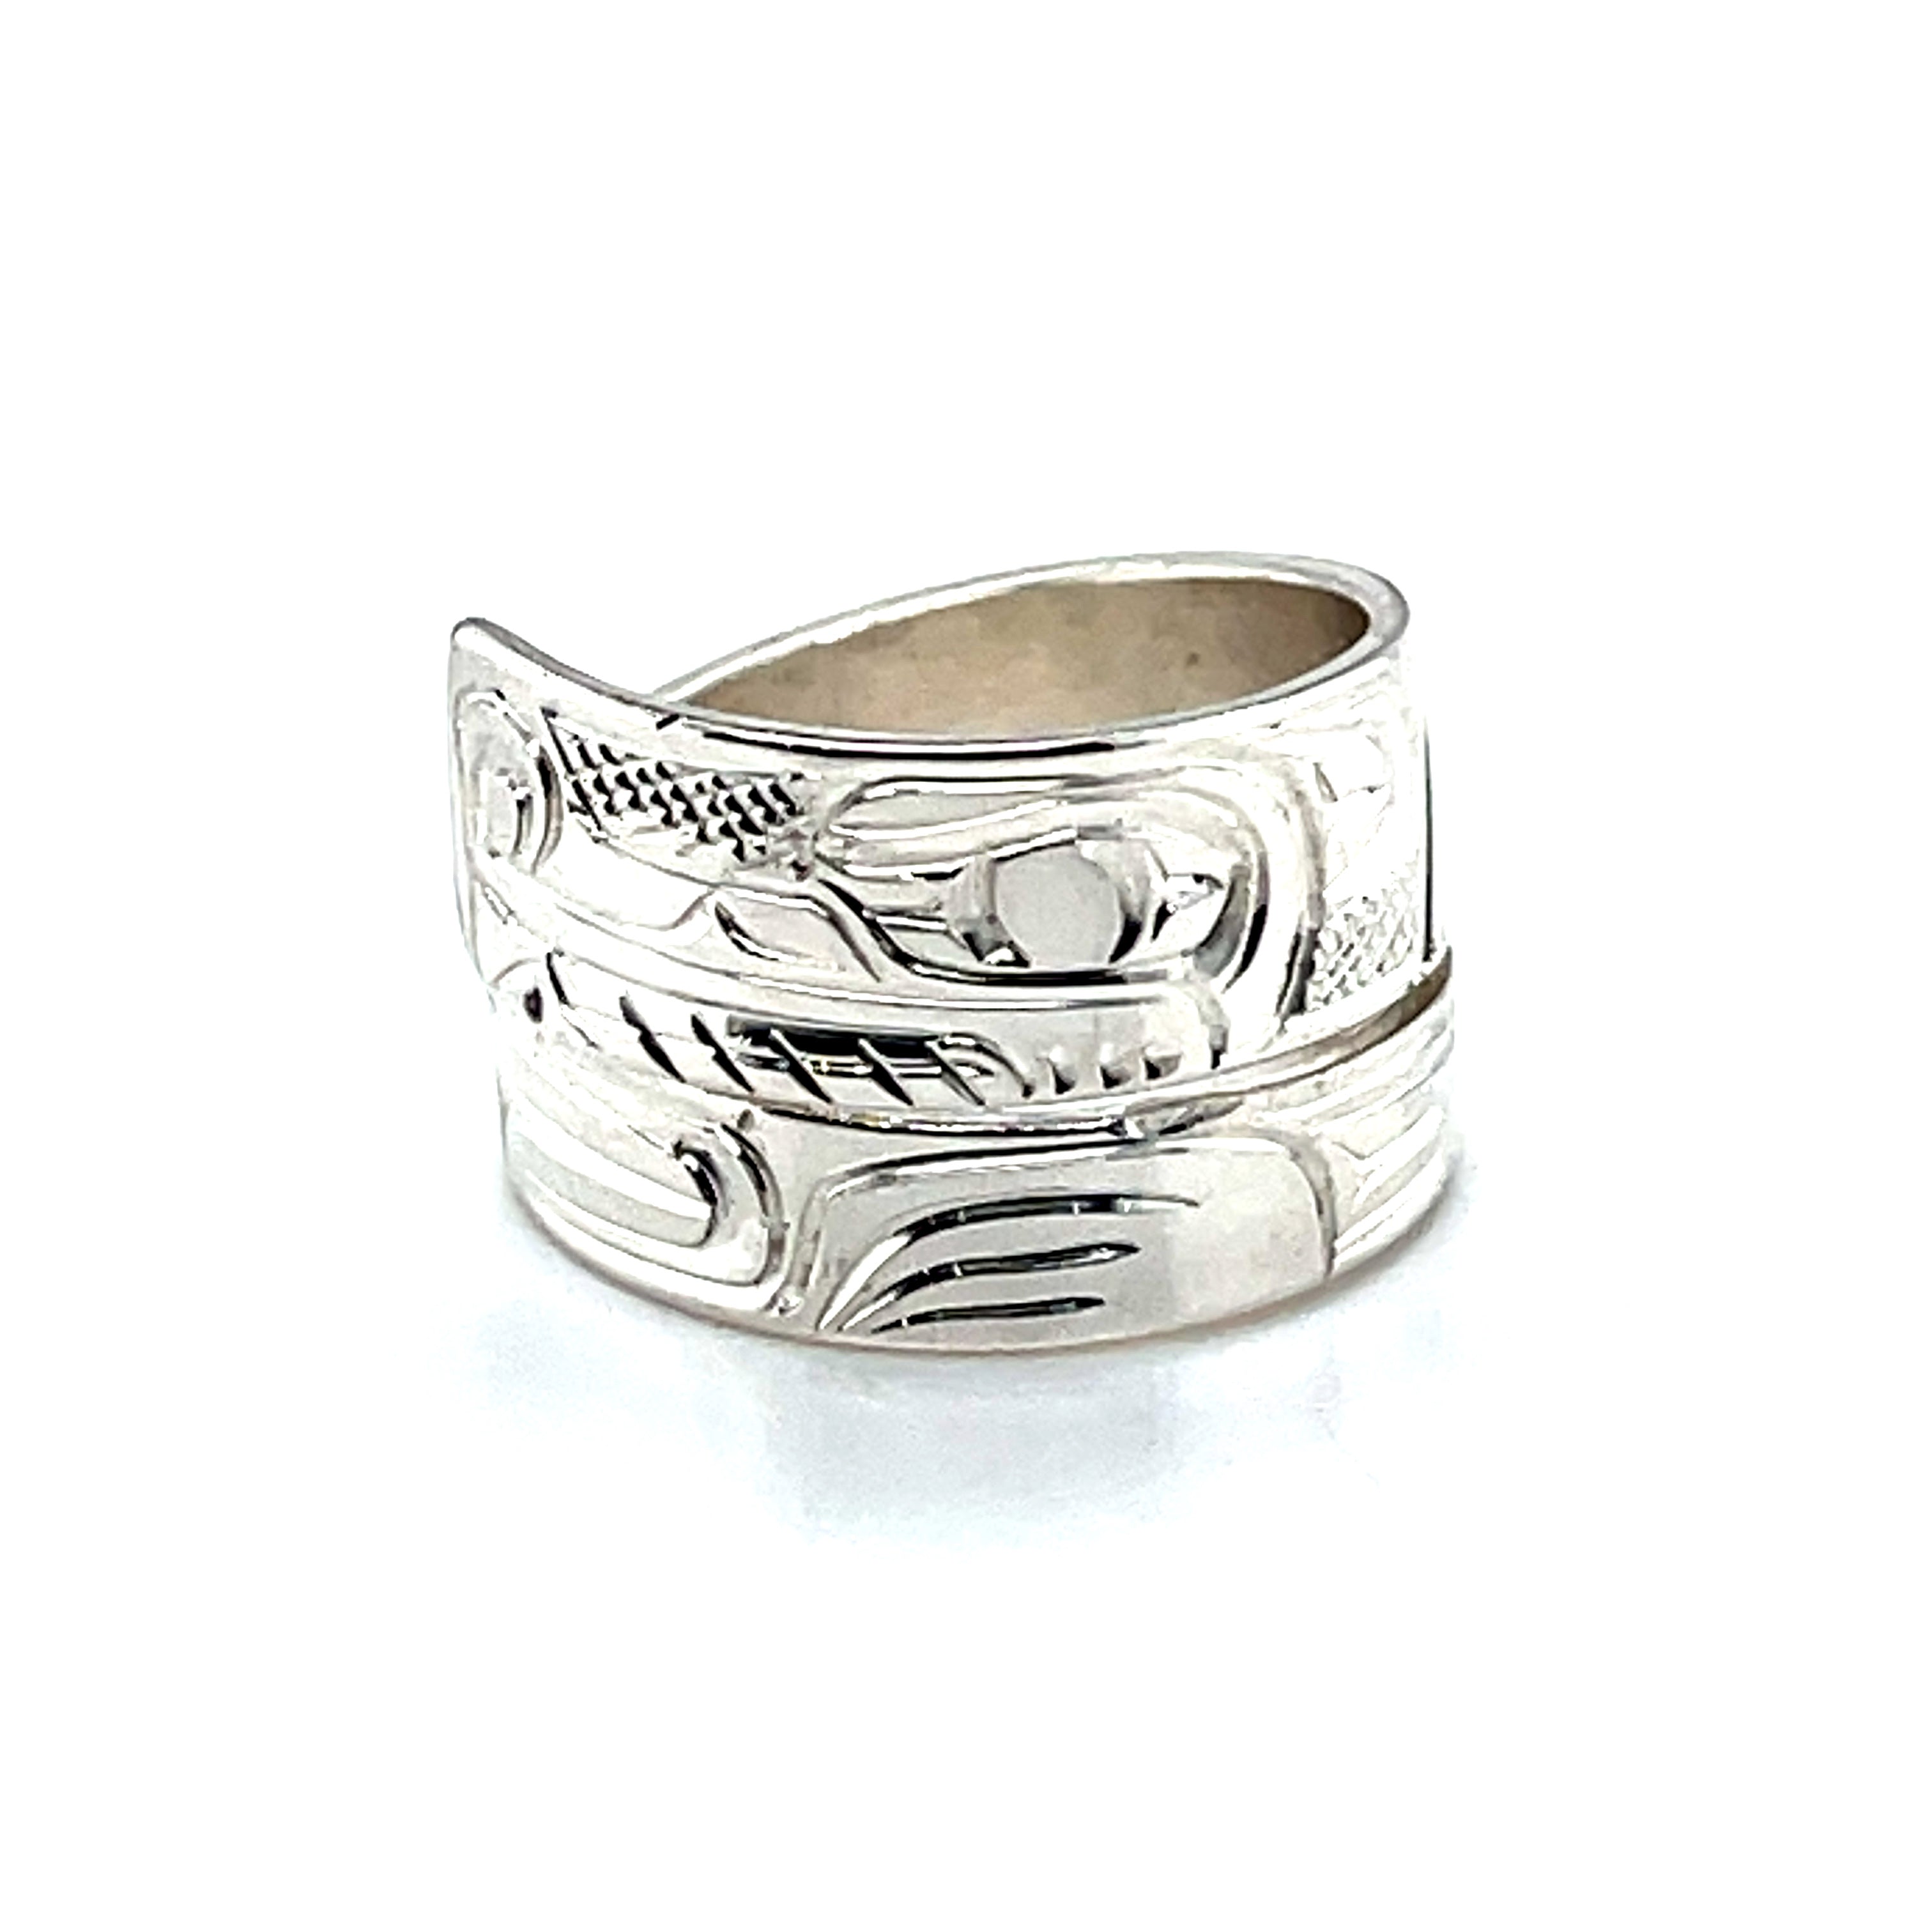 Ring - Sterling Silver - Wrap - Wolf - Size 6